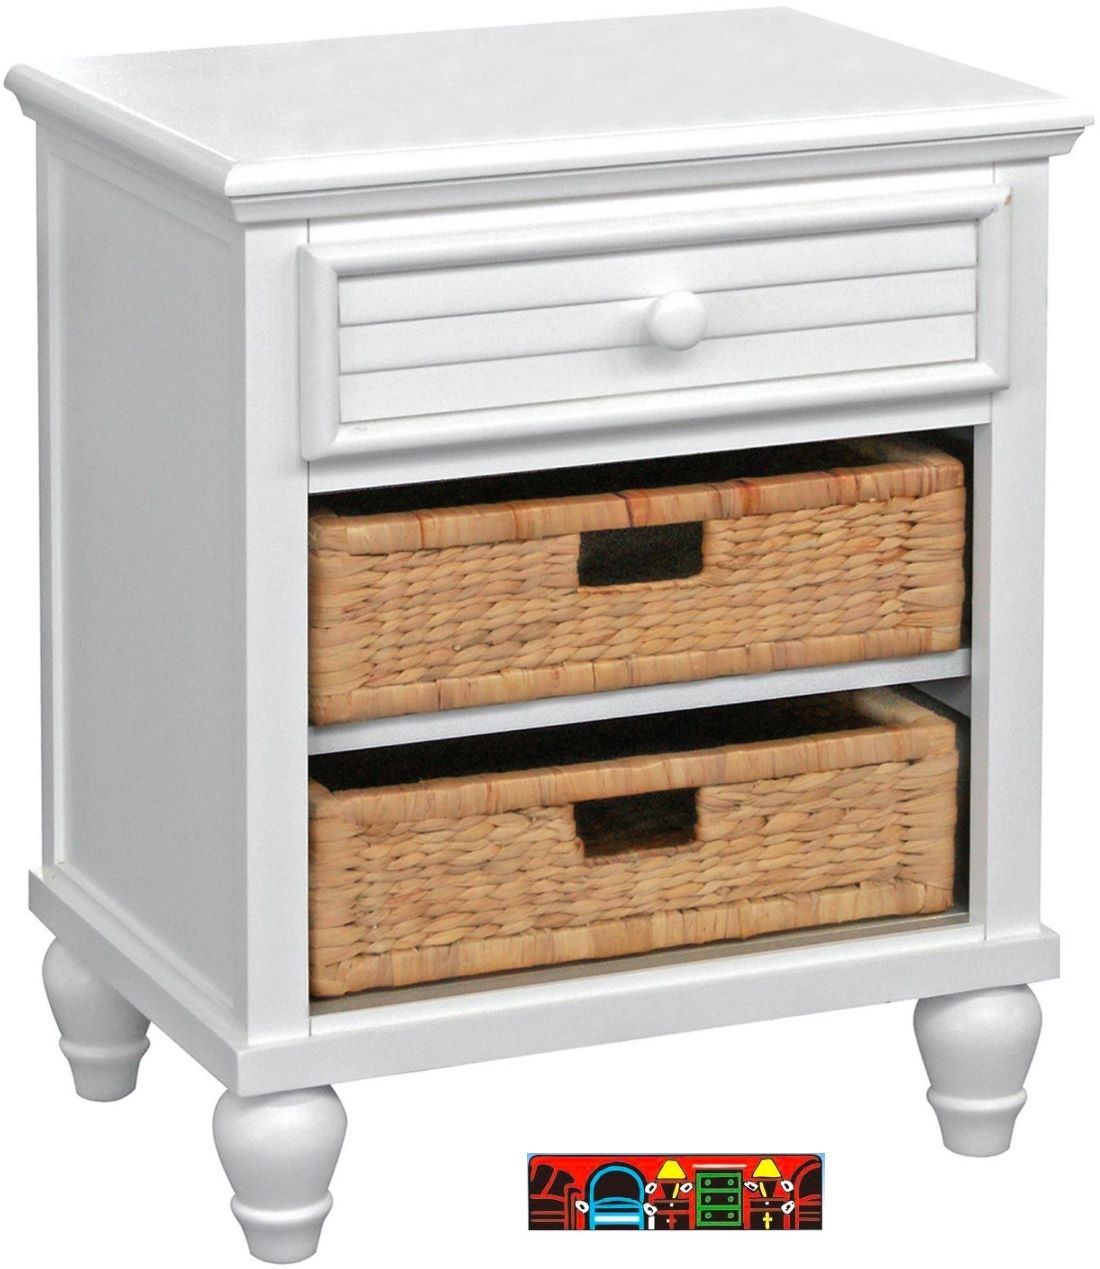 Sunset Nightstand, crafted from solid wood, featuring a white finish, one drawer, two baskets and louver accents.